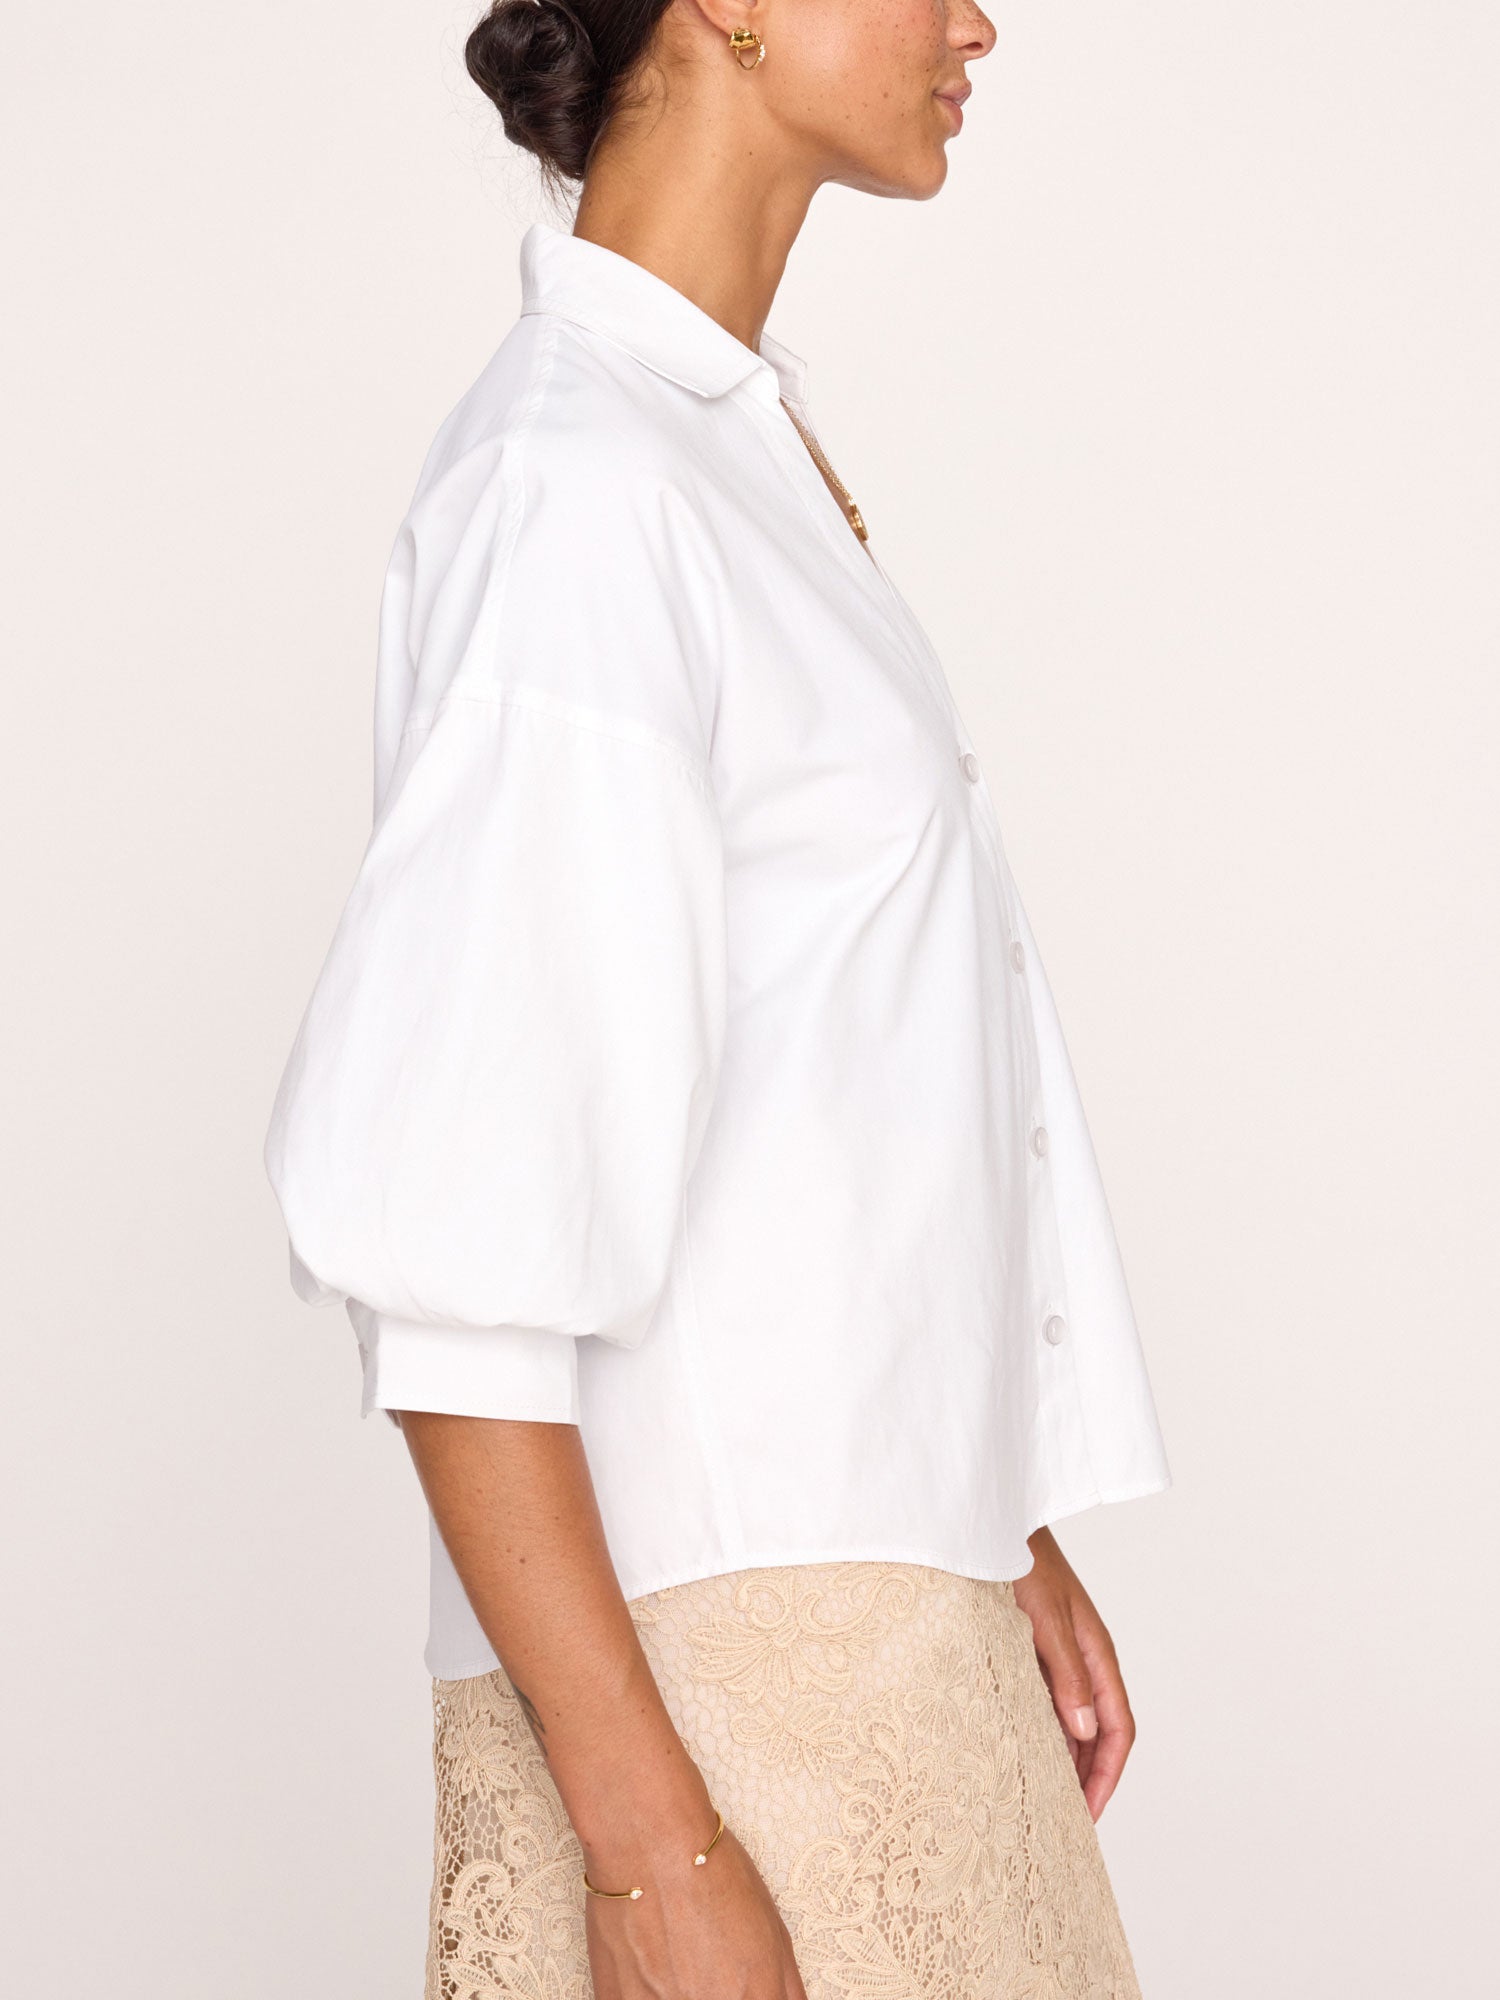 Kate V-neck button up white shirt side view